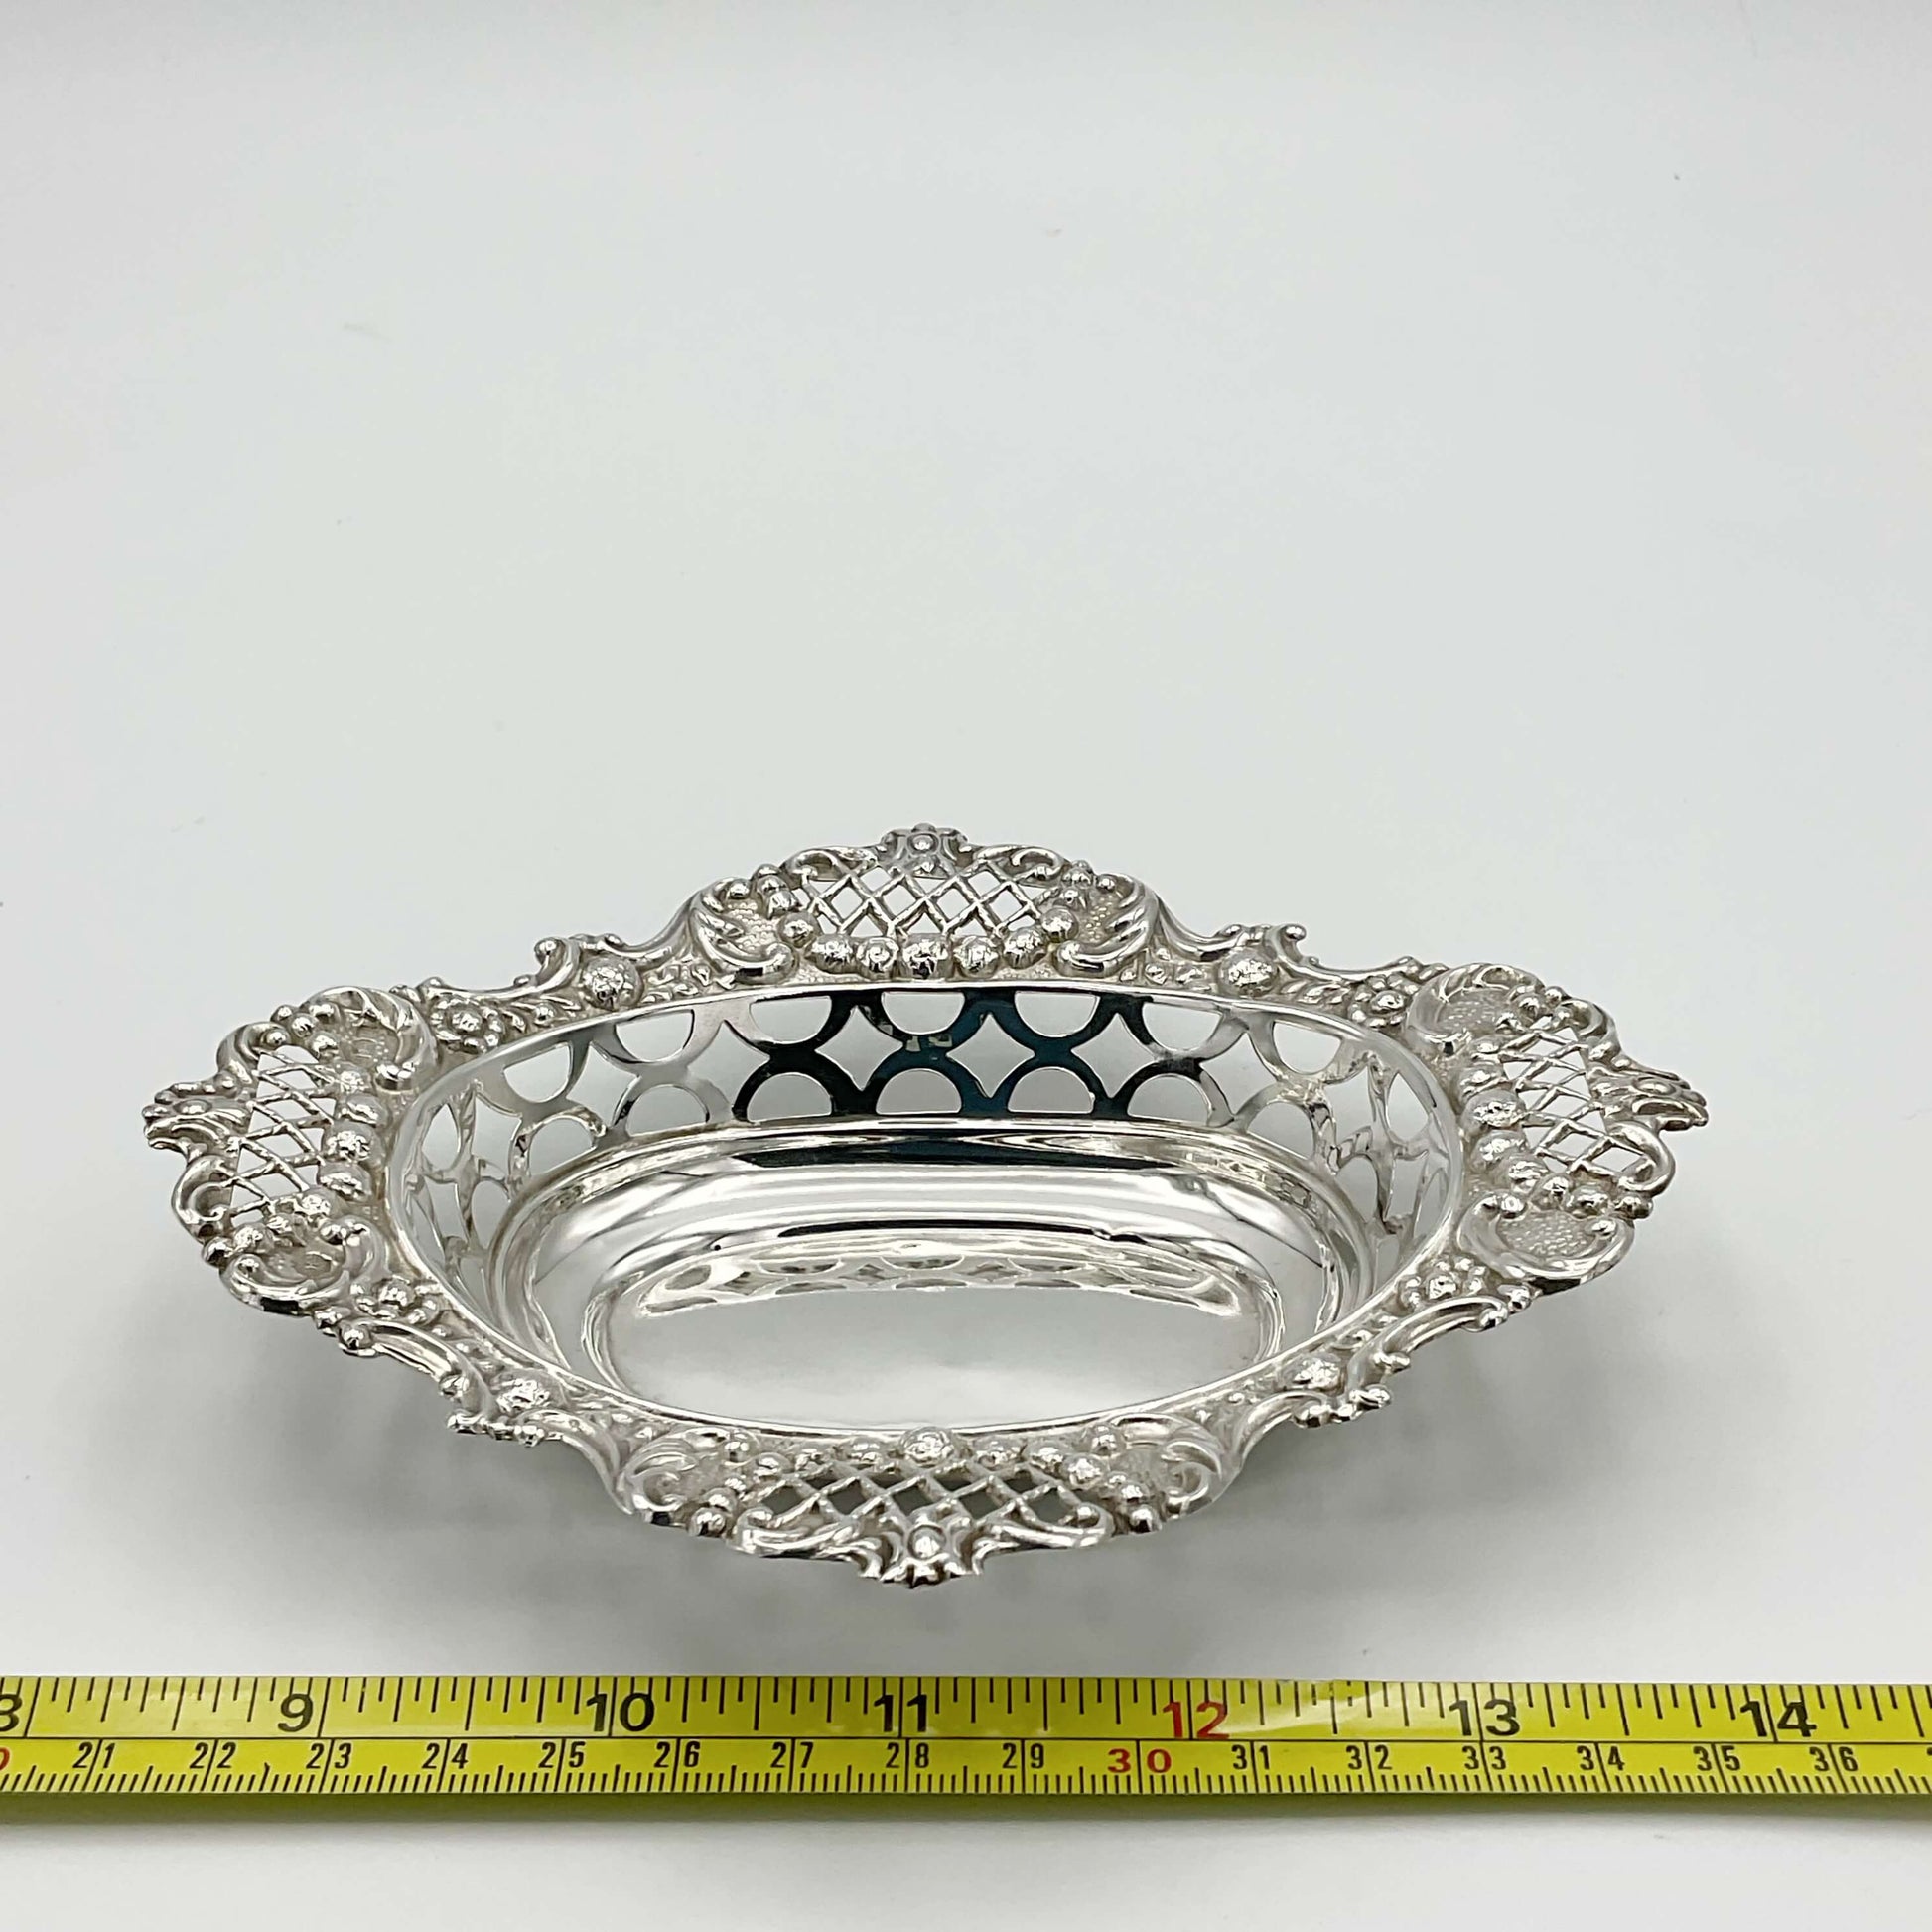 Antique Edwardian silver bowl next to tape measure showing size as 15.5cm